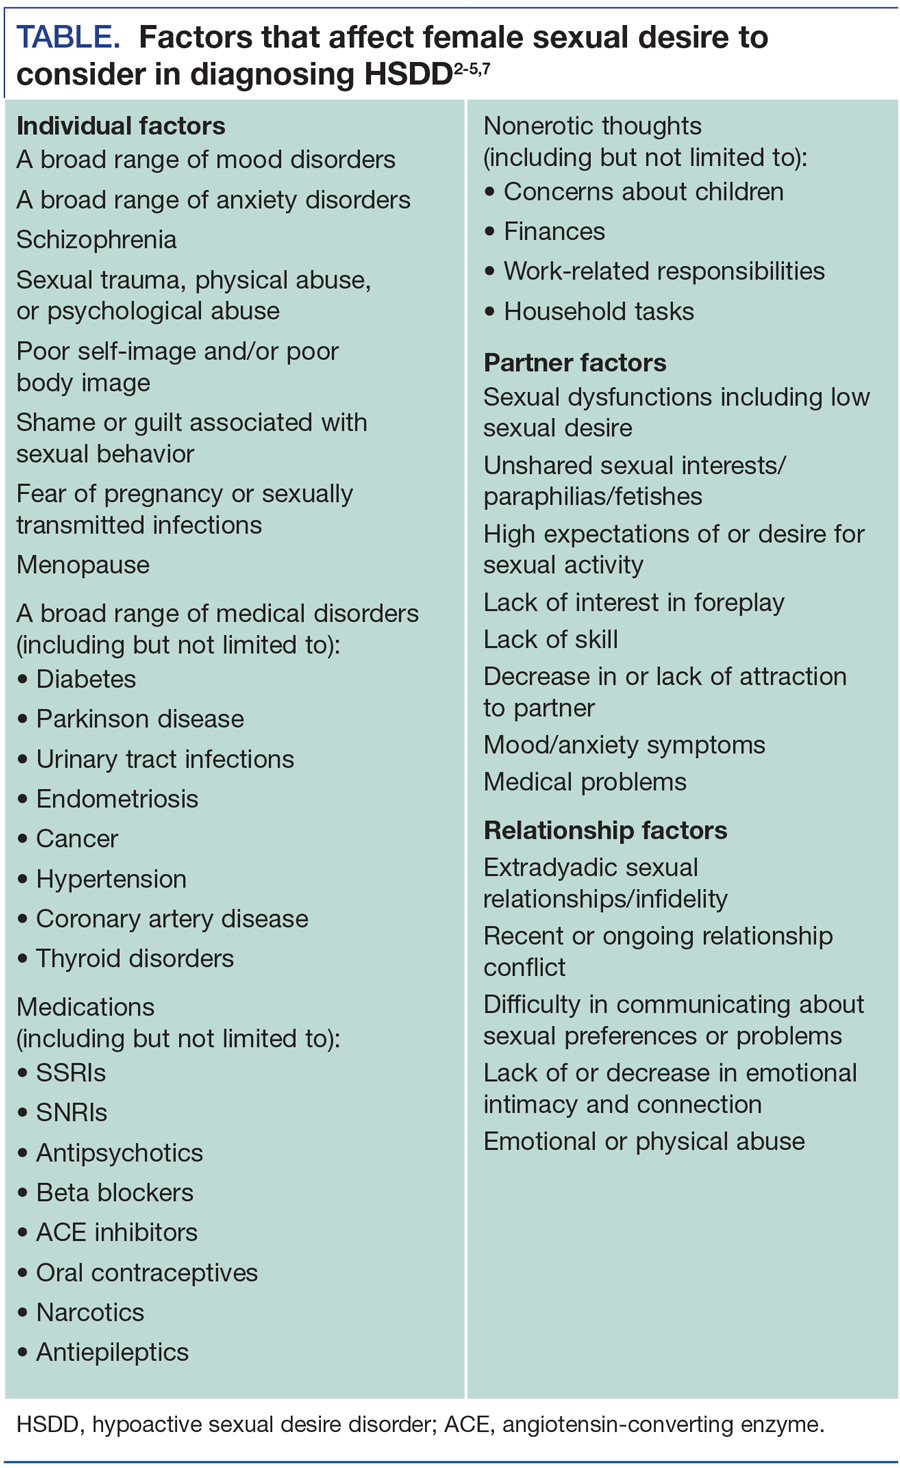 Factors that affect female sexual desire to consider in diagnosing HSDD2